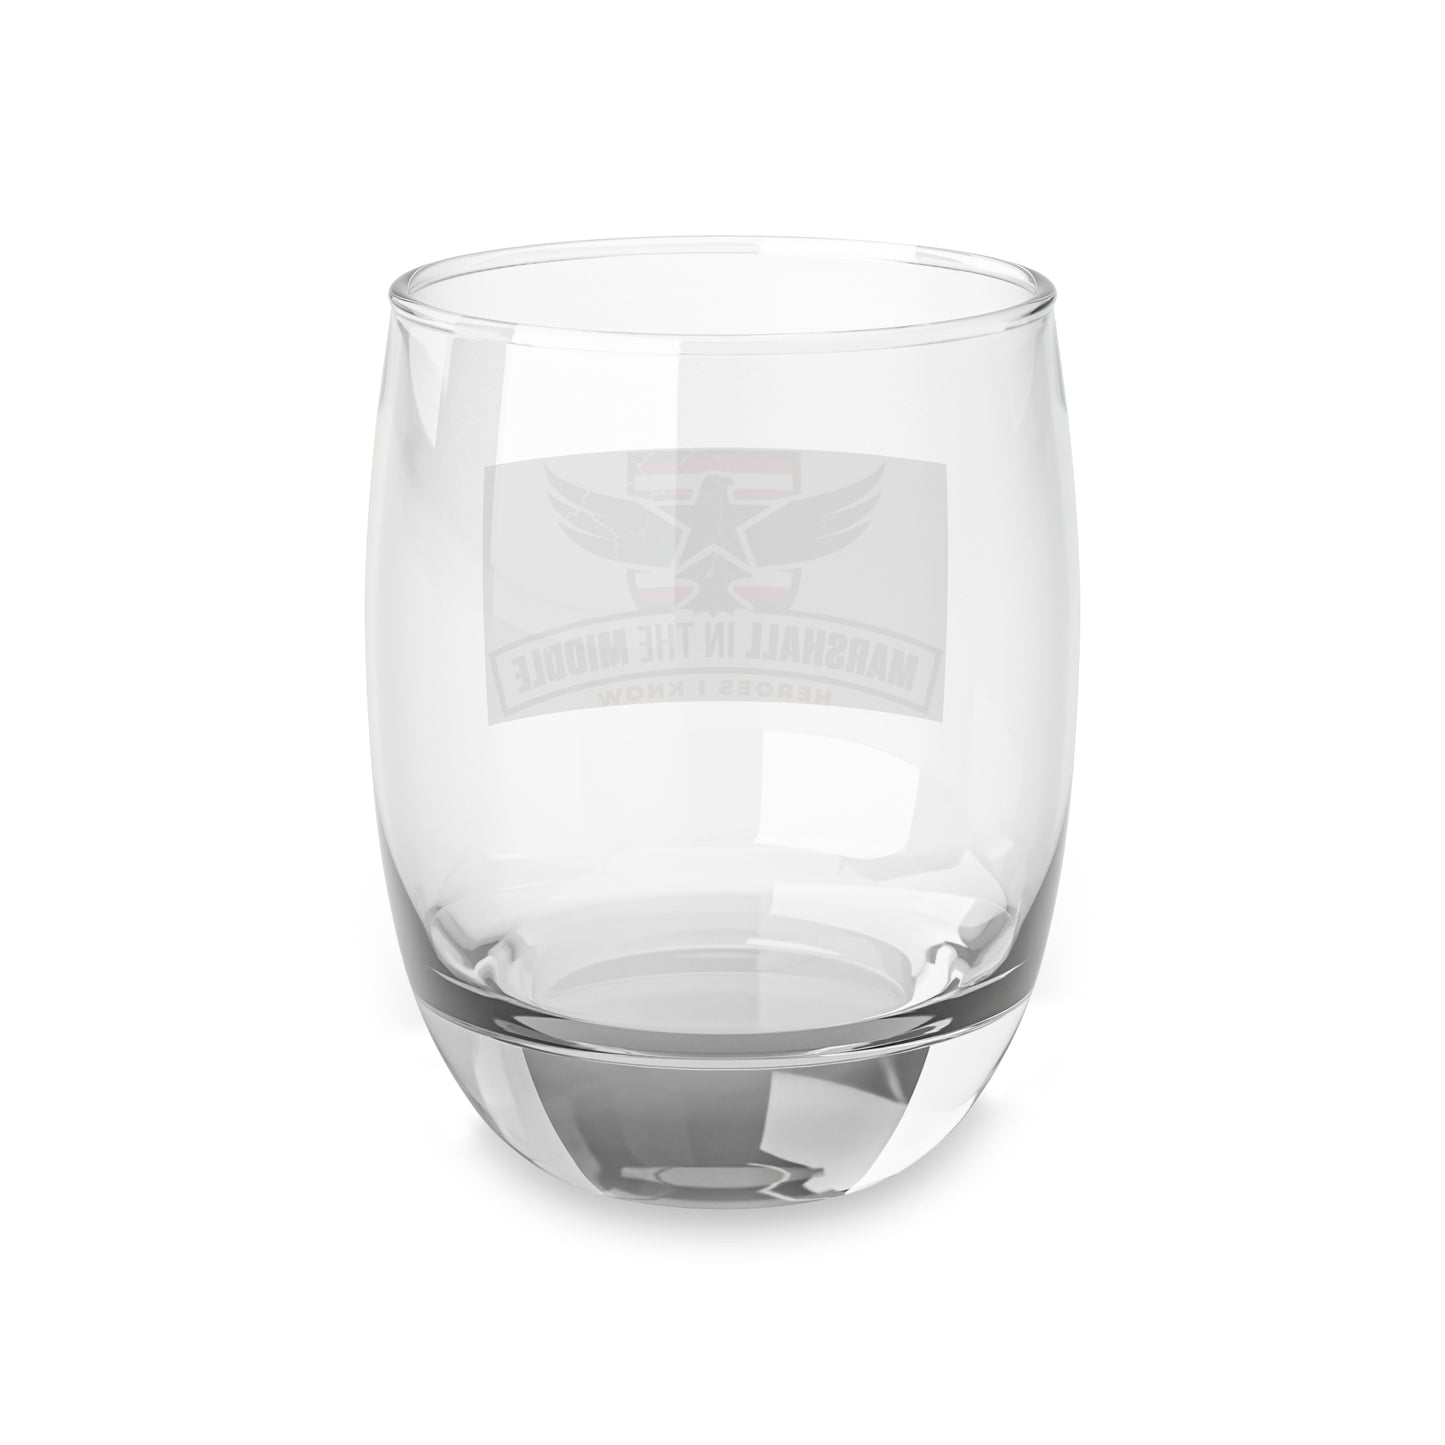 Marshall in the Middle Whiskey Glass